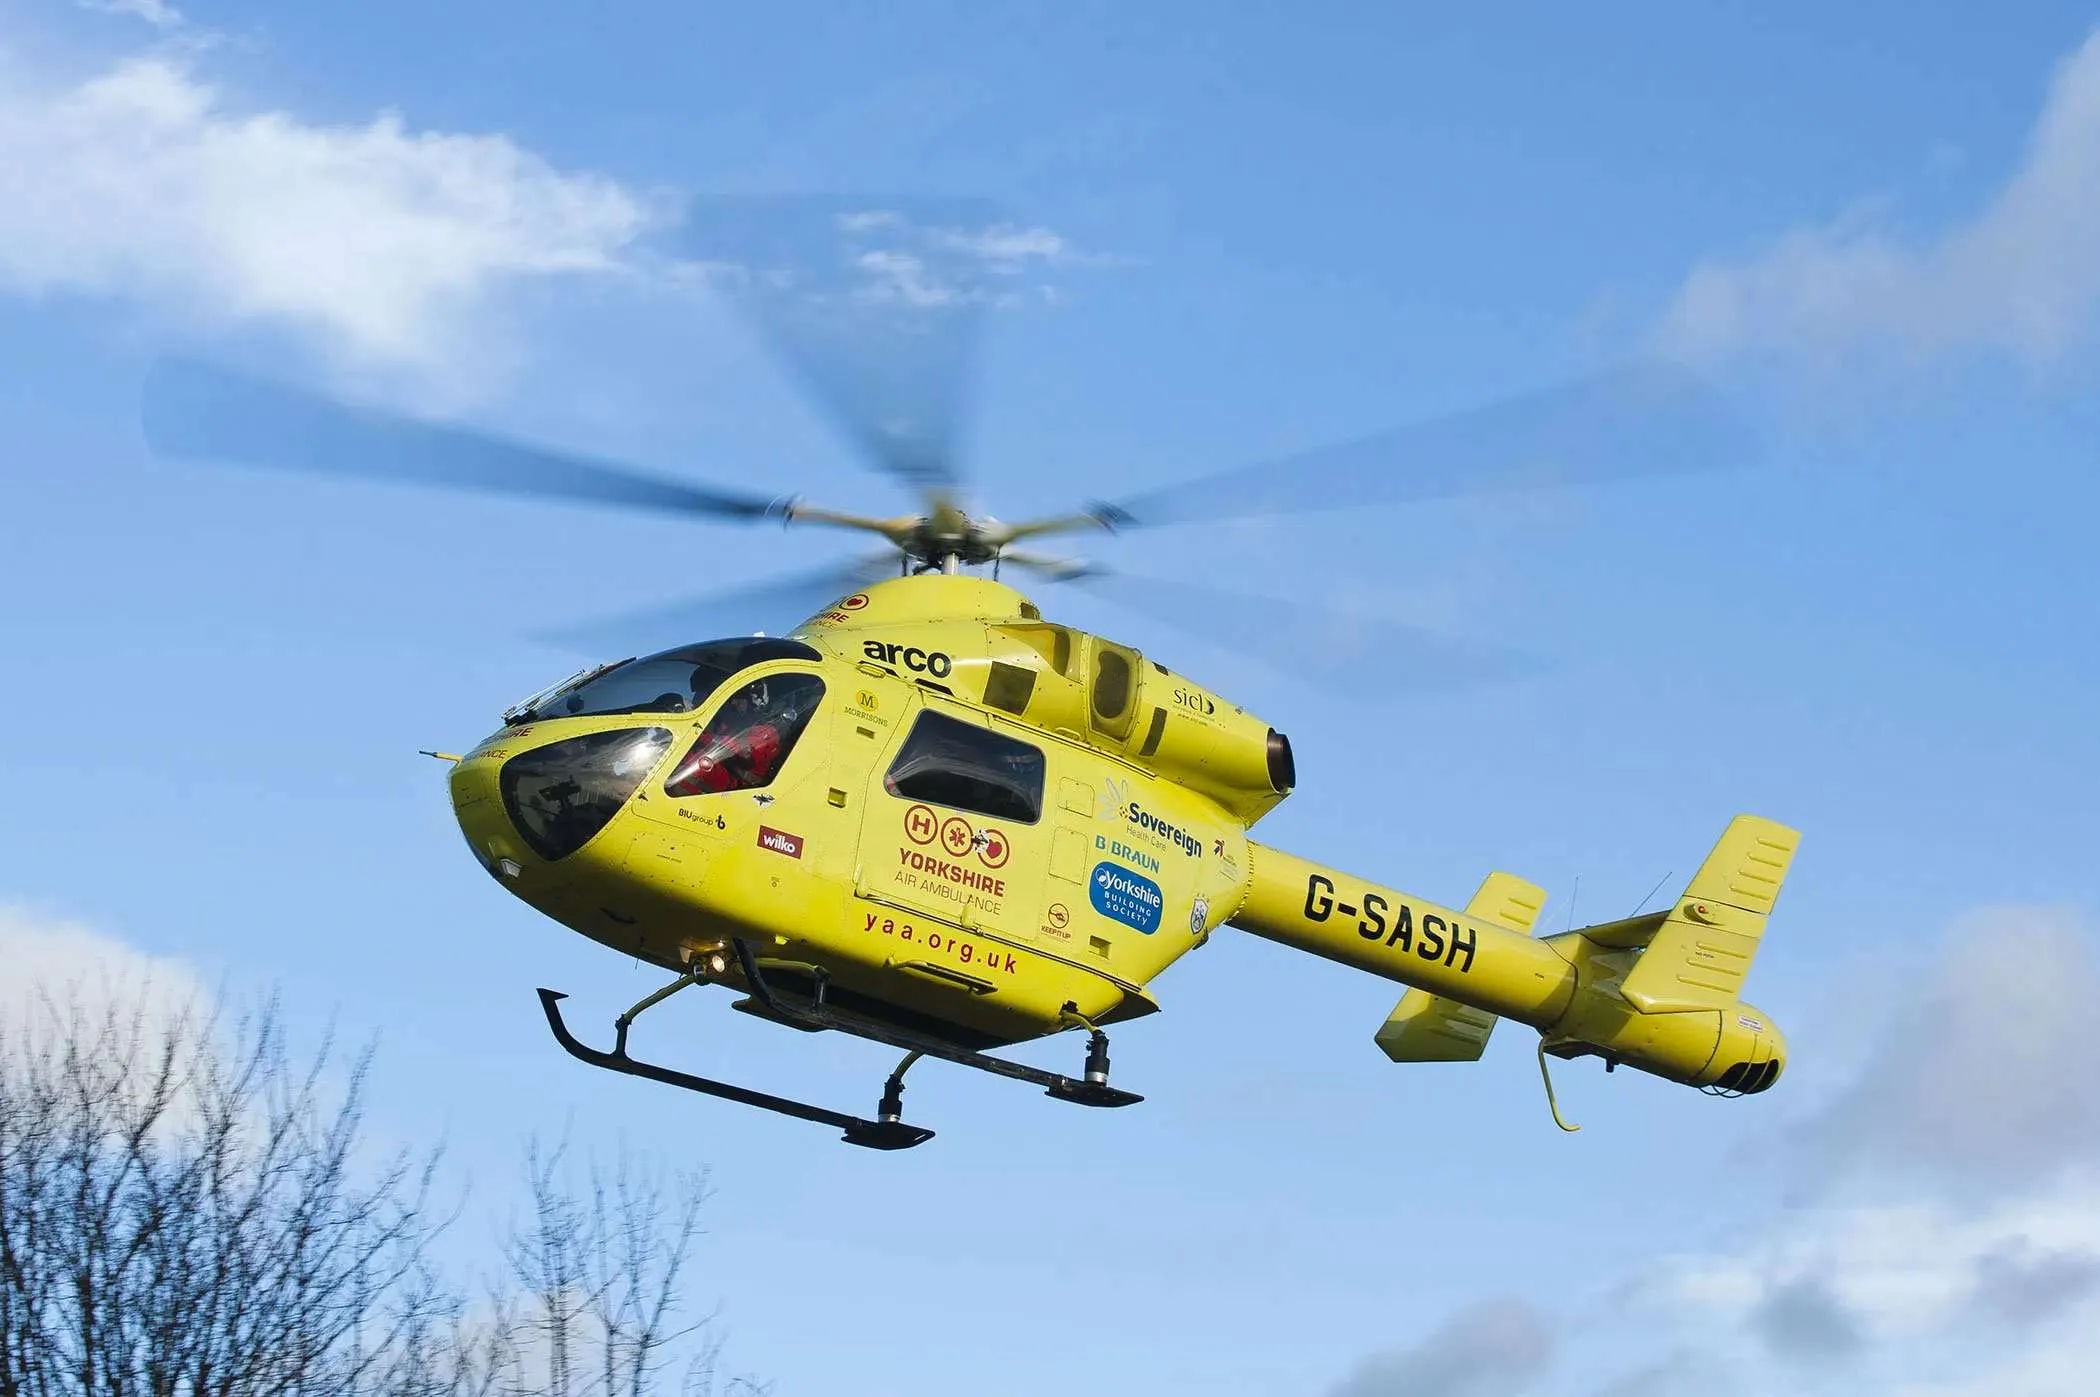 Yorkshire Air Ambulance, a yellow helicopter, in flight.